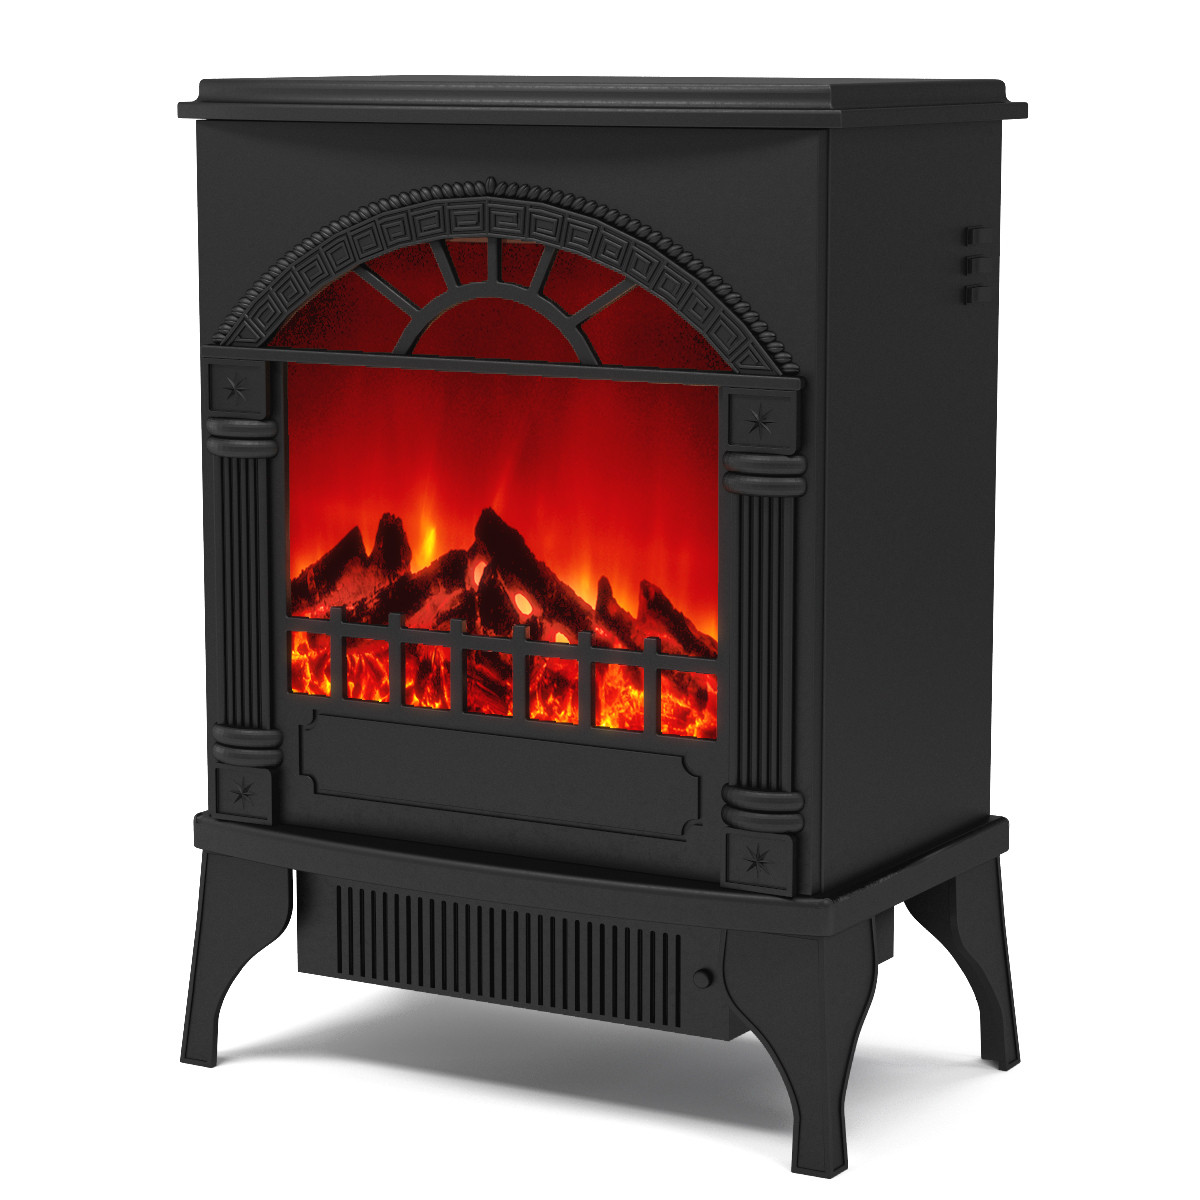 Electric Fireplace Space Heater
 Apollo Electric Fireplace Free Standing Portable Space